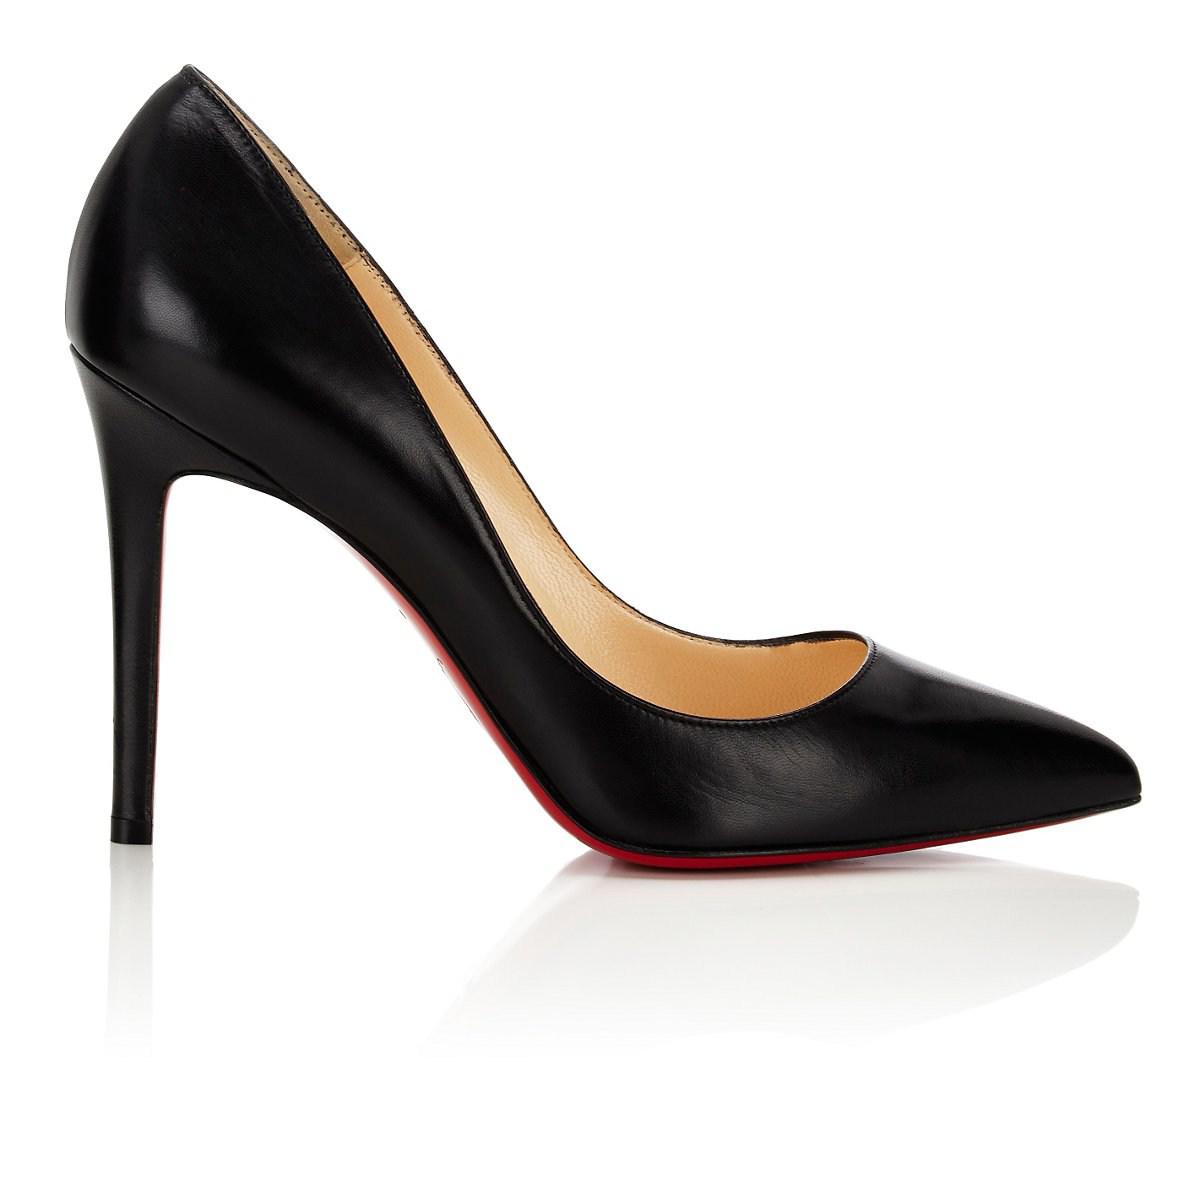 Lyst - Christian Louboutin Pigalle Pumps in Black - Save 38.1294964028777%